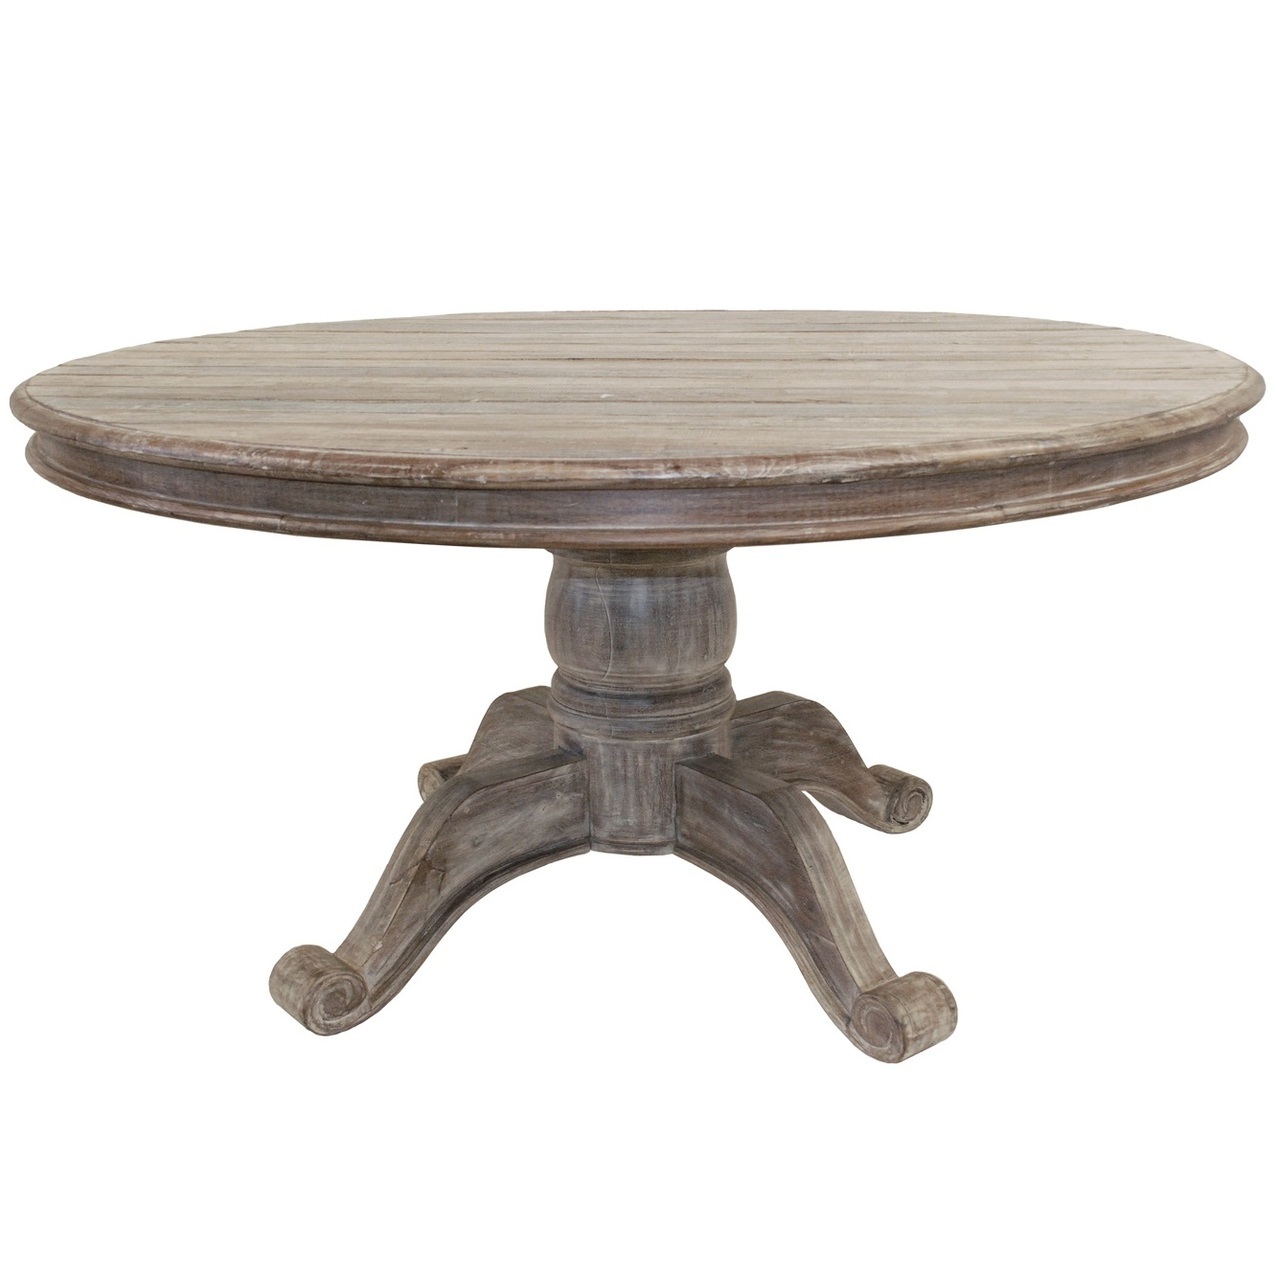 hampton rustic round pedestal dining table zin home accent long narrow console farmhouse and end tables gray target nautical theme bathroom bench velocity furniture jcpenney sofa